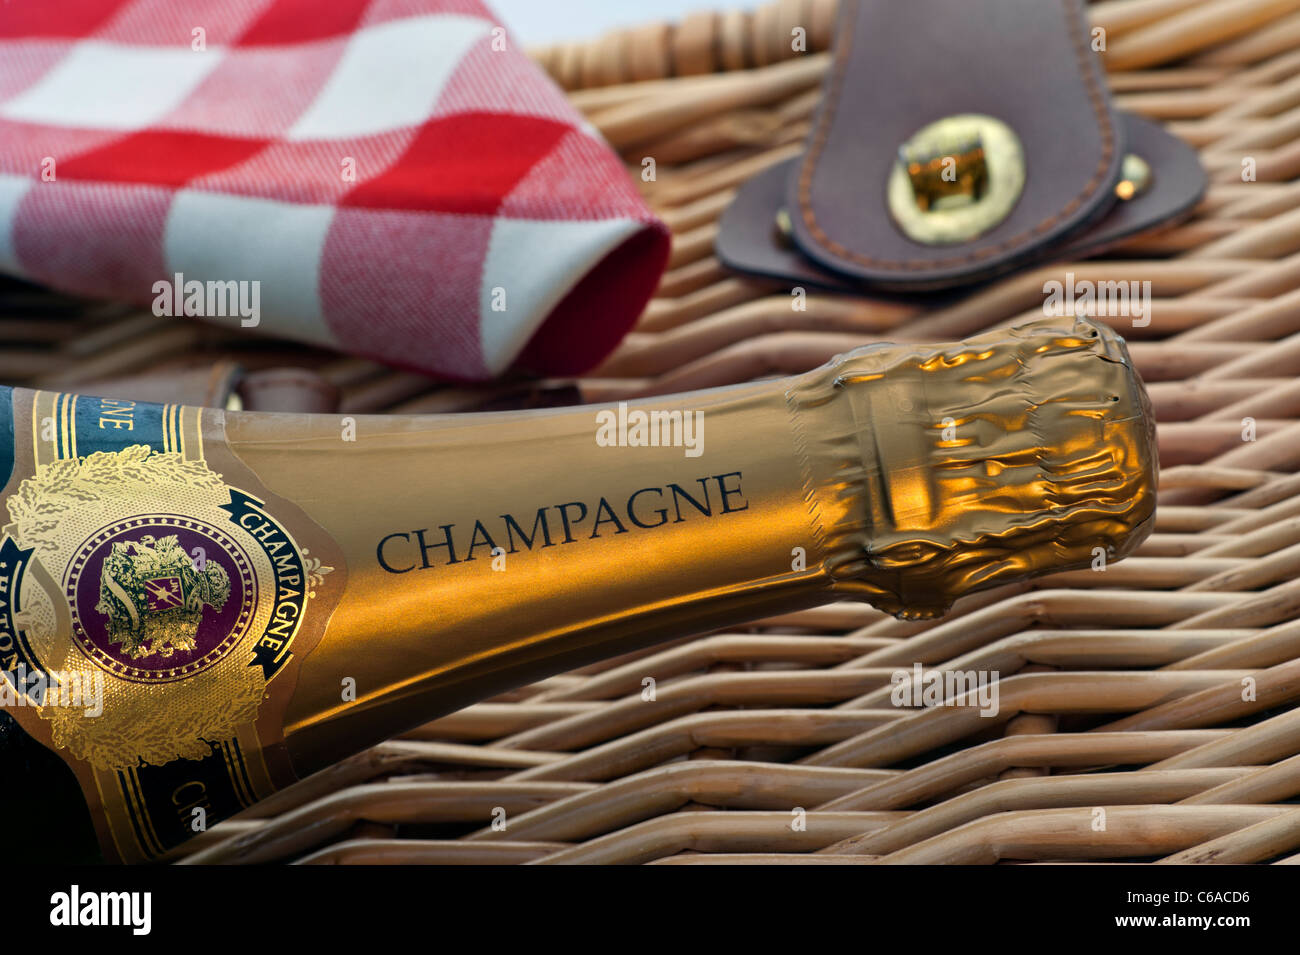 Champagne bottle on wicker picnic hamper at luxury alfresco summer event picnic situation Stock Photo